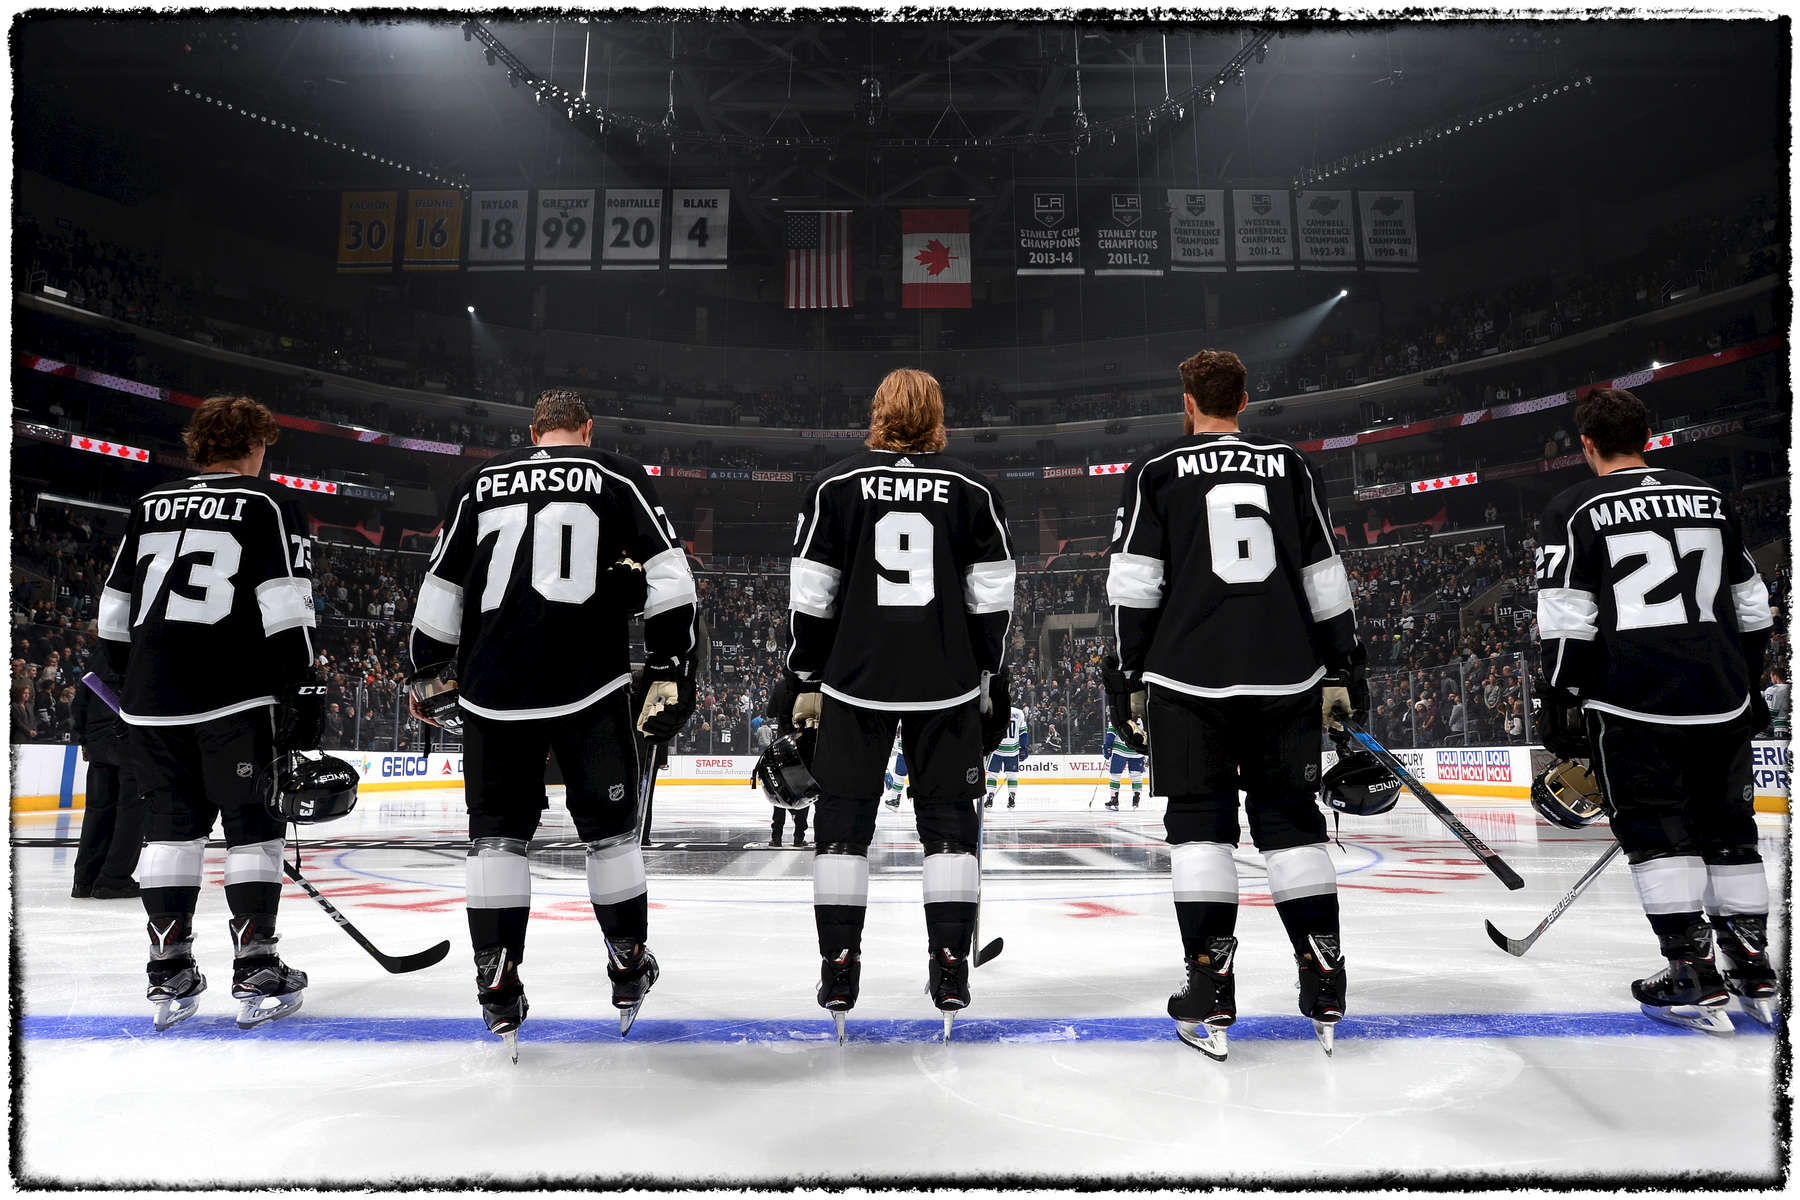 Photographed for the Los Angeles Kings / NHL / Bernstein Associates Inc.